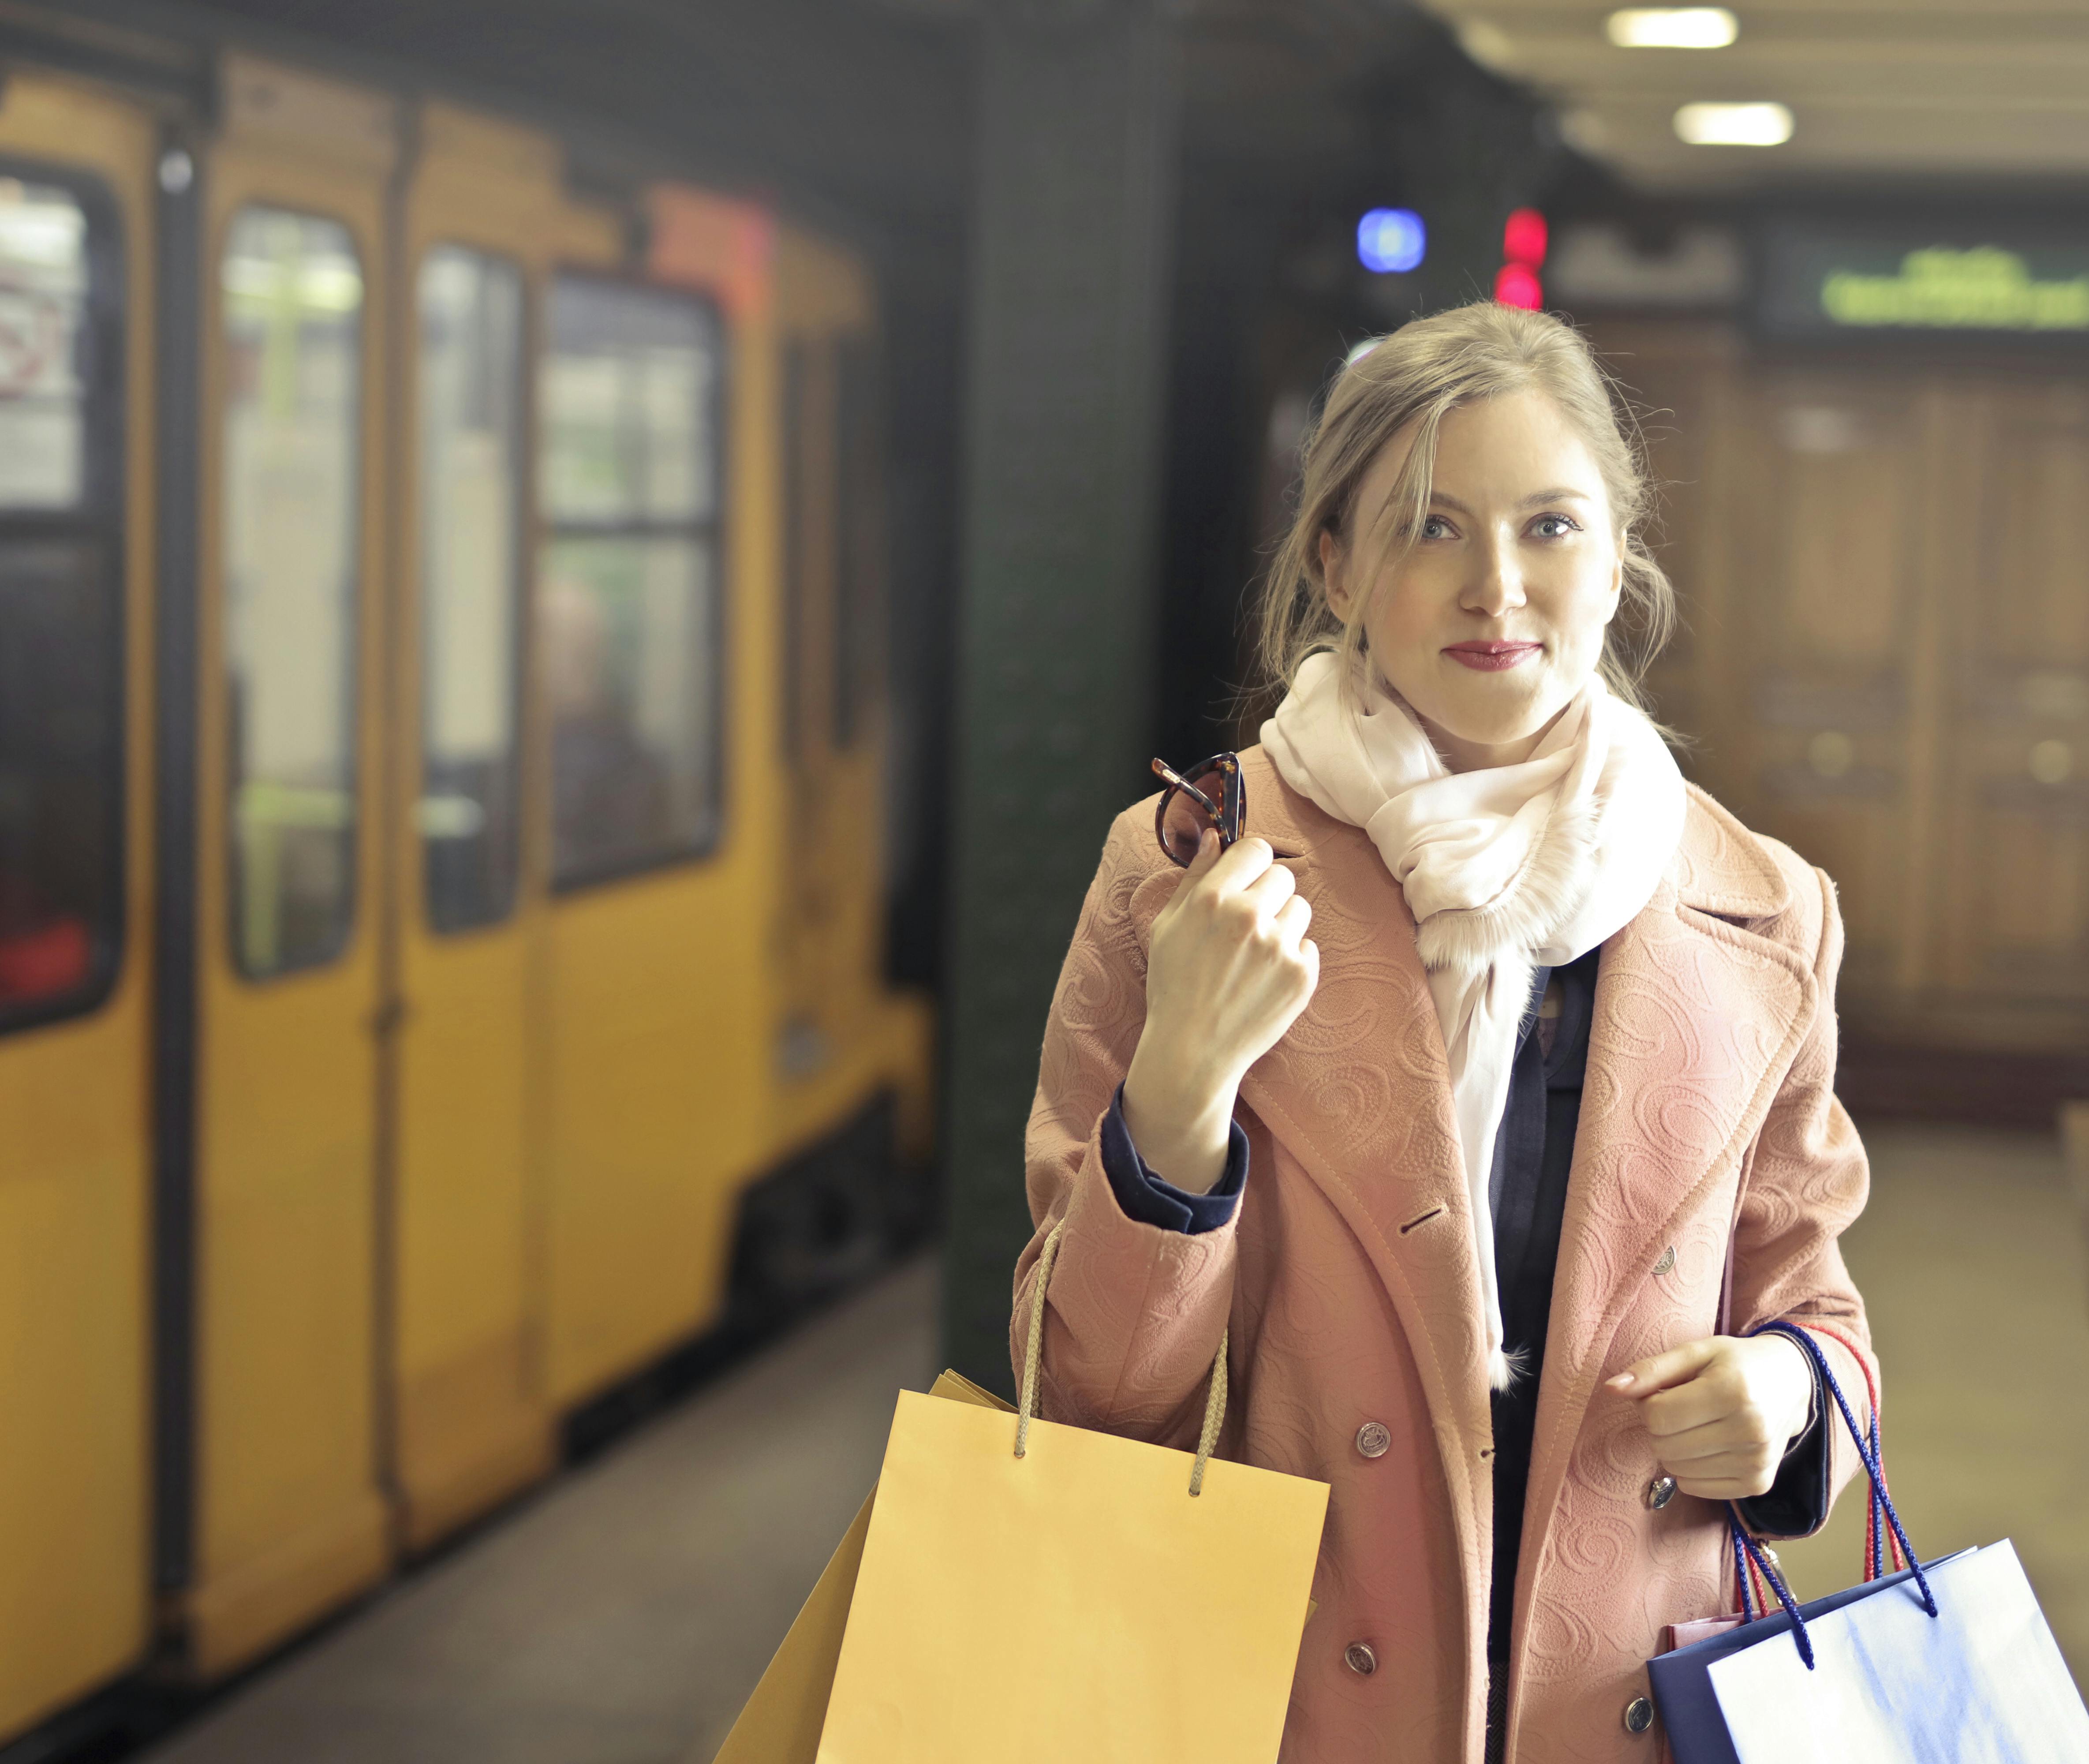 Woman in Pink Coat Holding Shopping Bags